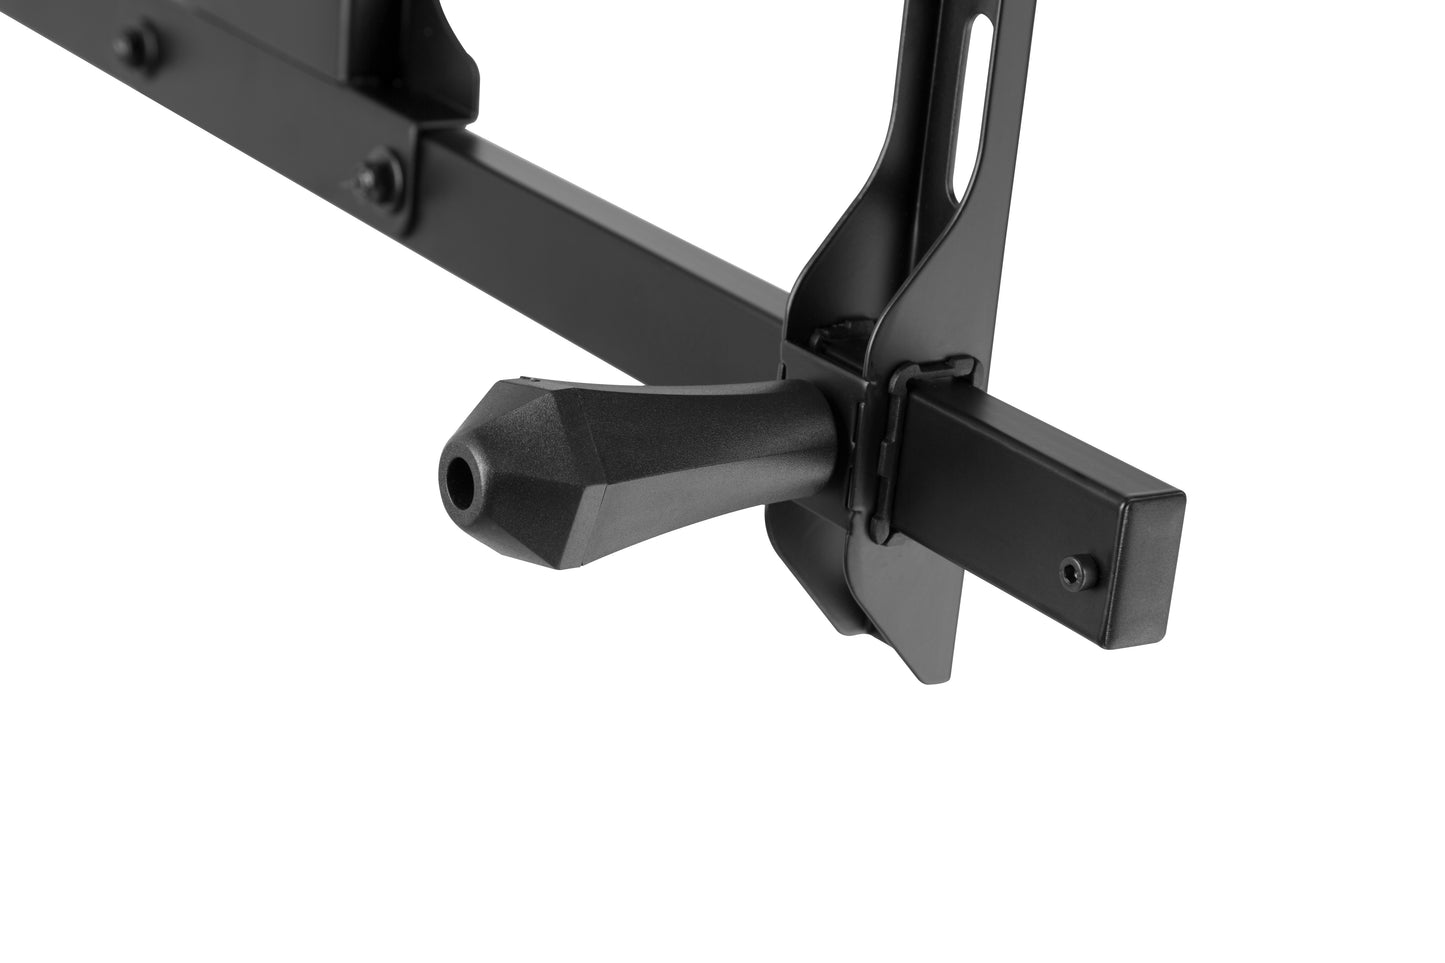 ProMounts Motorized Ceiling TV Mount for TVs 32" - 70" Up to 77 lbs with Smart App